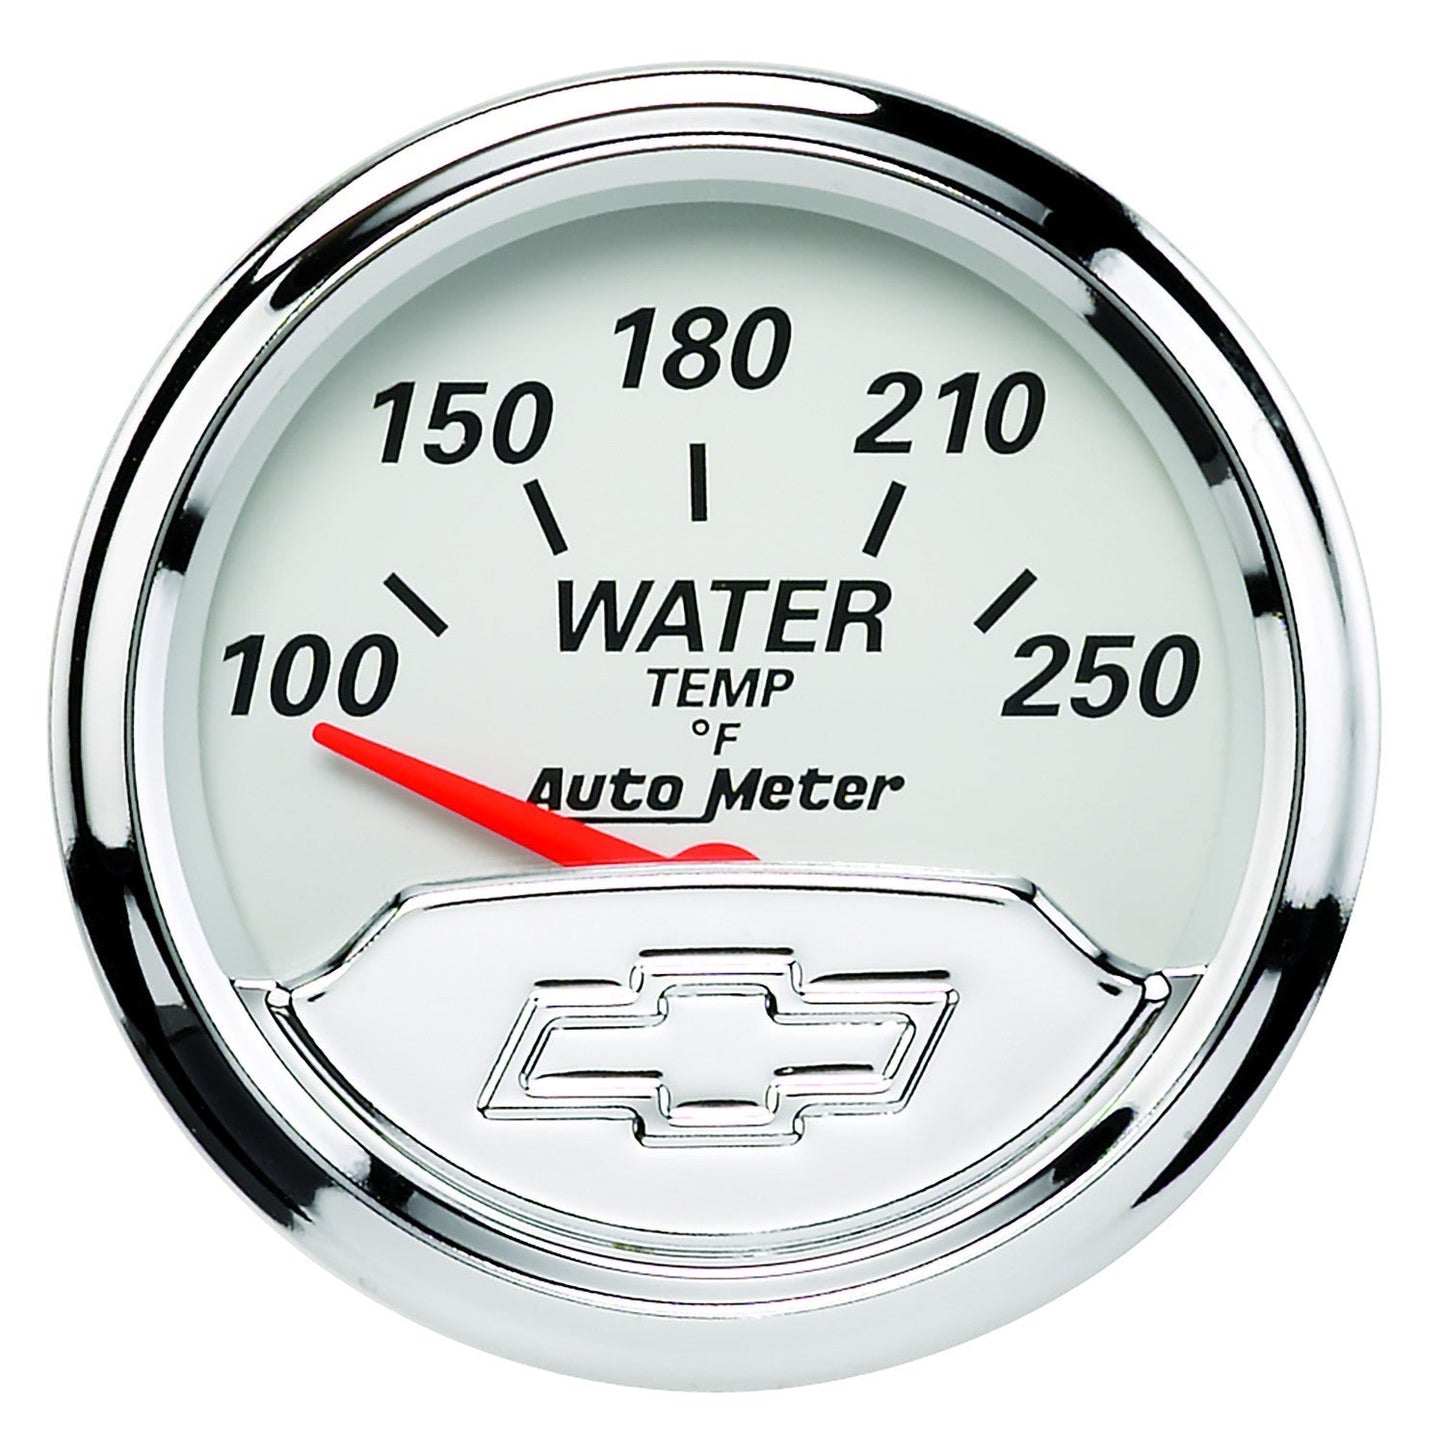 AutoMeter - 2-1/16" WATER TEMPERATURE, 100-250 °F, AIR-CORE, CHEVY VINTAGE (1337-00408)